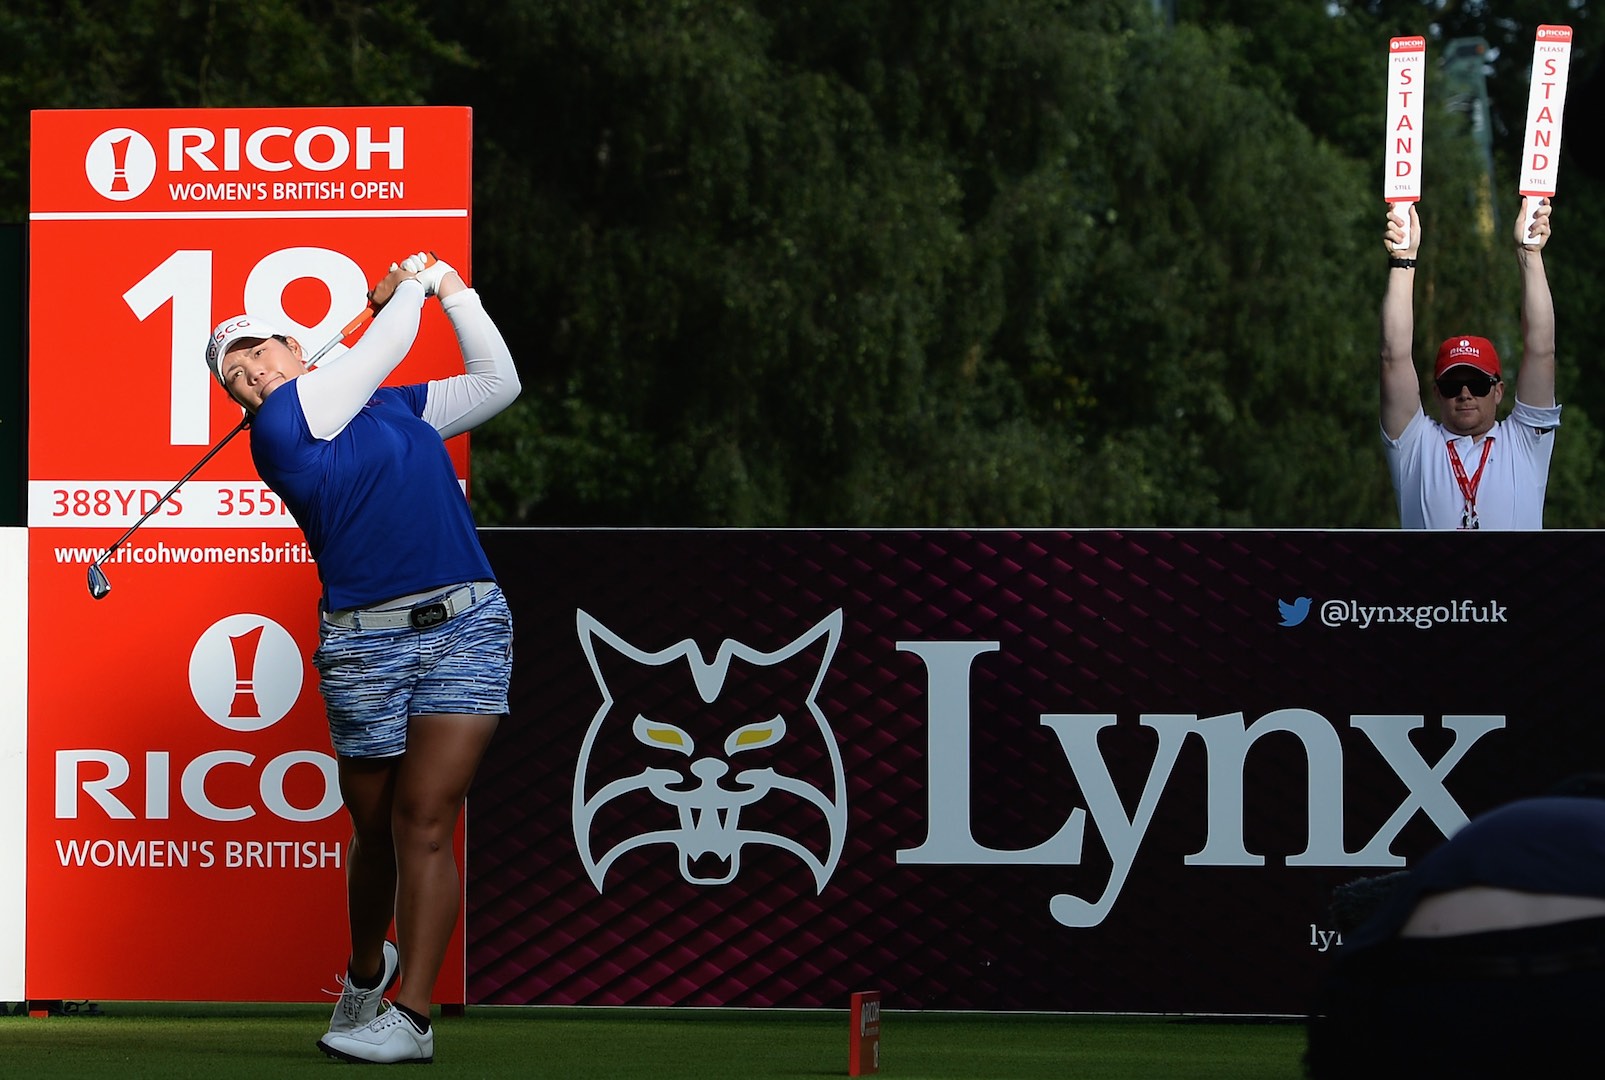 WOBURN, ENGLAND - JULY 30: Ariya Jutanugarn of Thailand plays her first shot on the18th tee during the Ricoh Women's British Open - Day Three at Woburn Golf Club on July 30, 2016 in Woburn, England. (Photo by Tony Marshall/Getty Images)